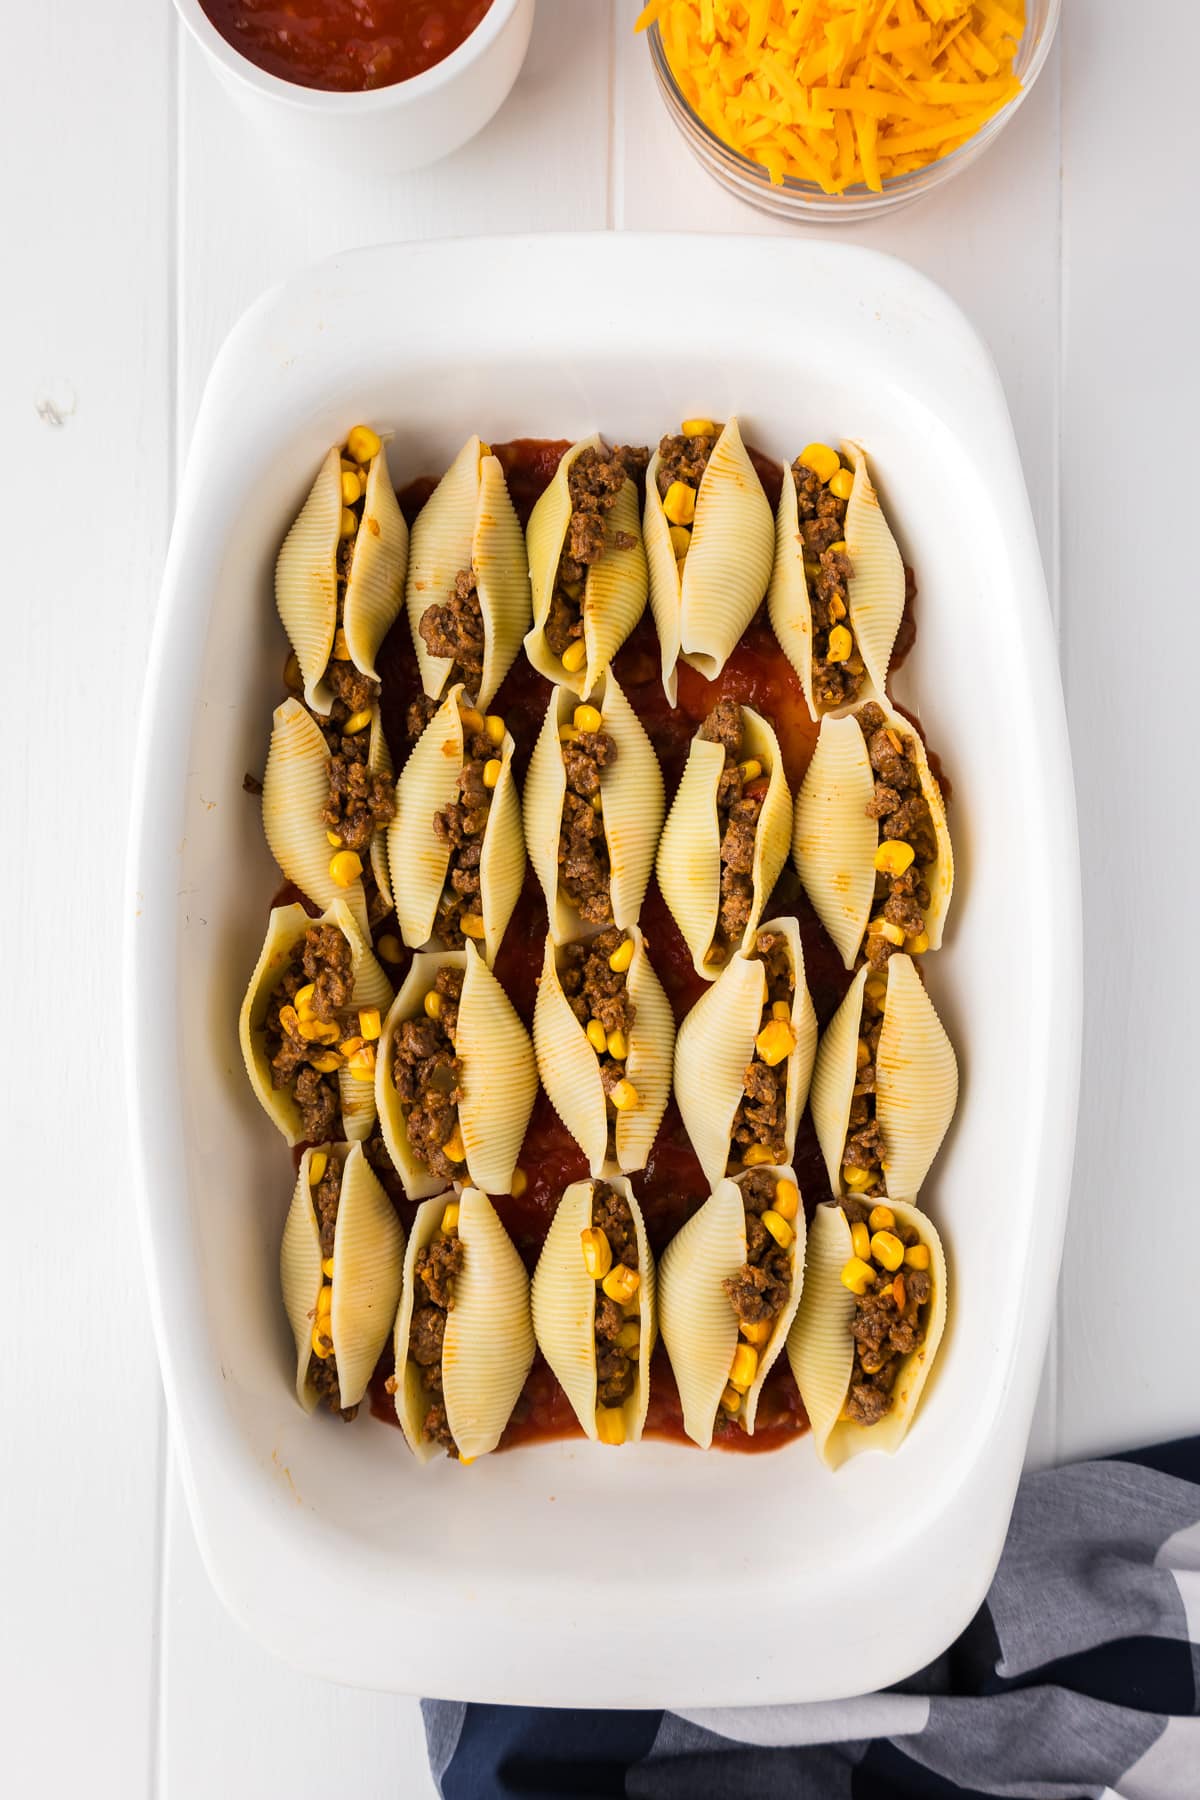 Taco shells lined up in a casserole dish stuffed with taco meat and corn with cheese and salsa in bowls nearby.